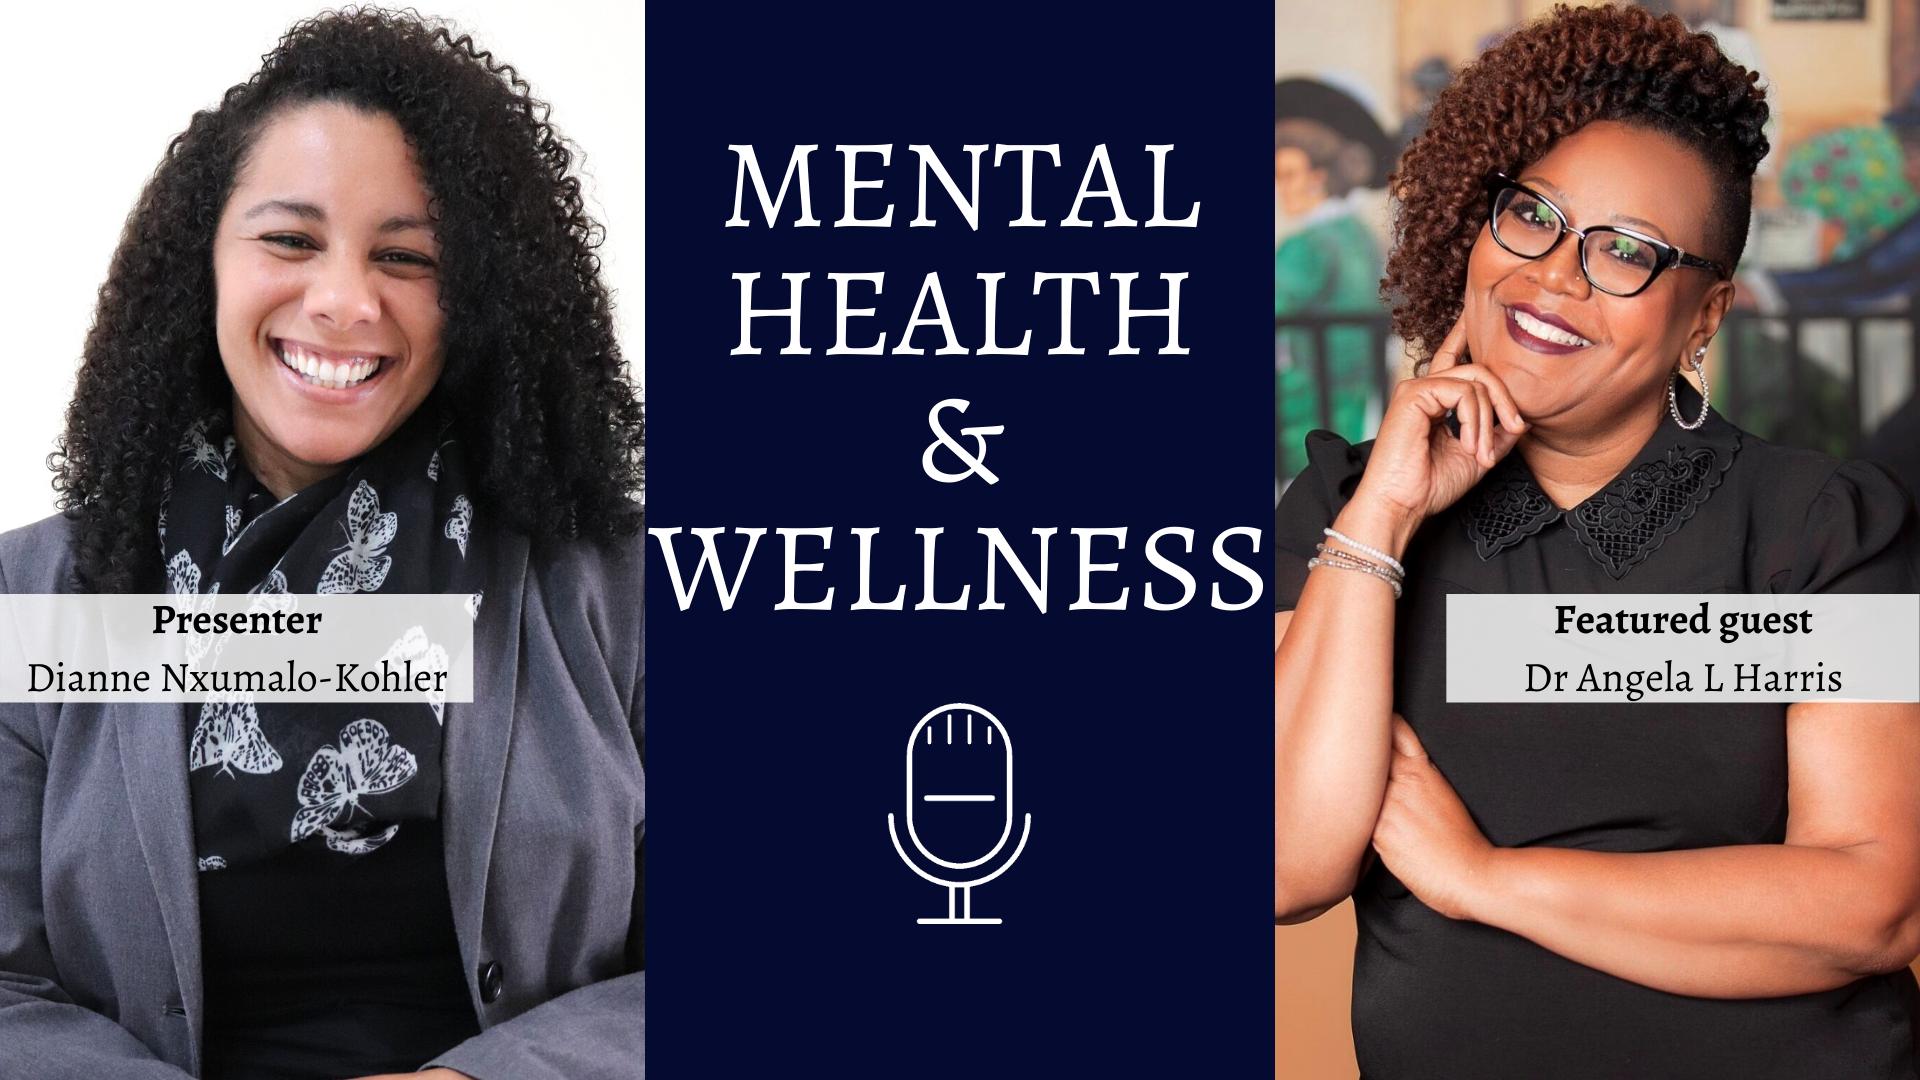 Mental Health and Wellness: A Conversation with Dr Angela L Harris